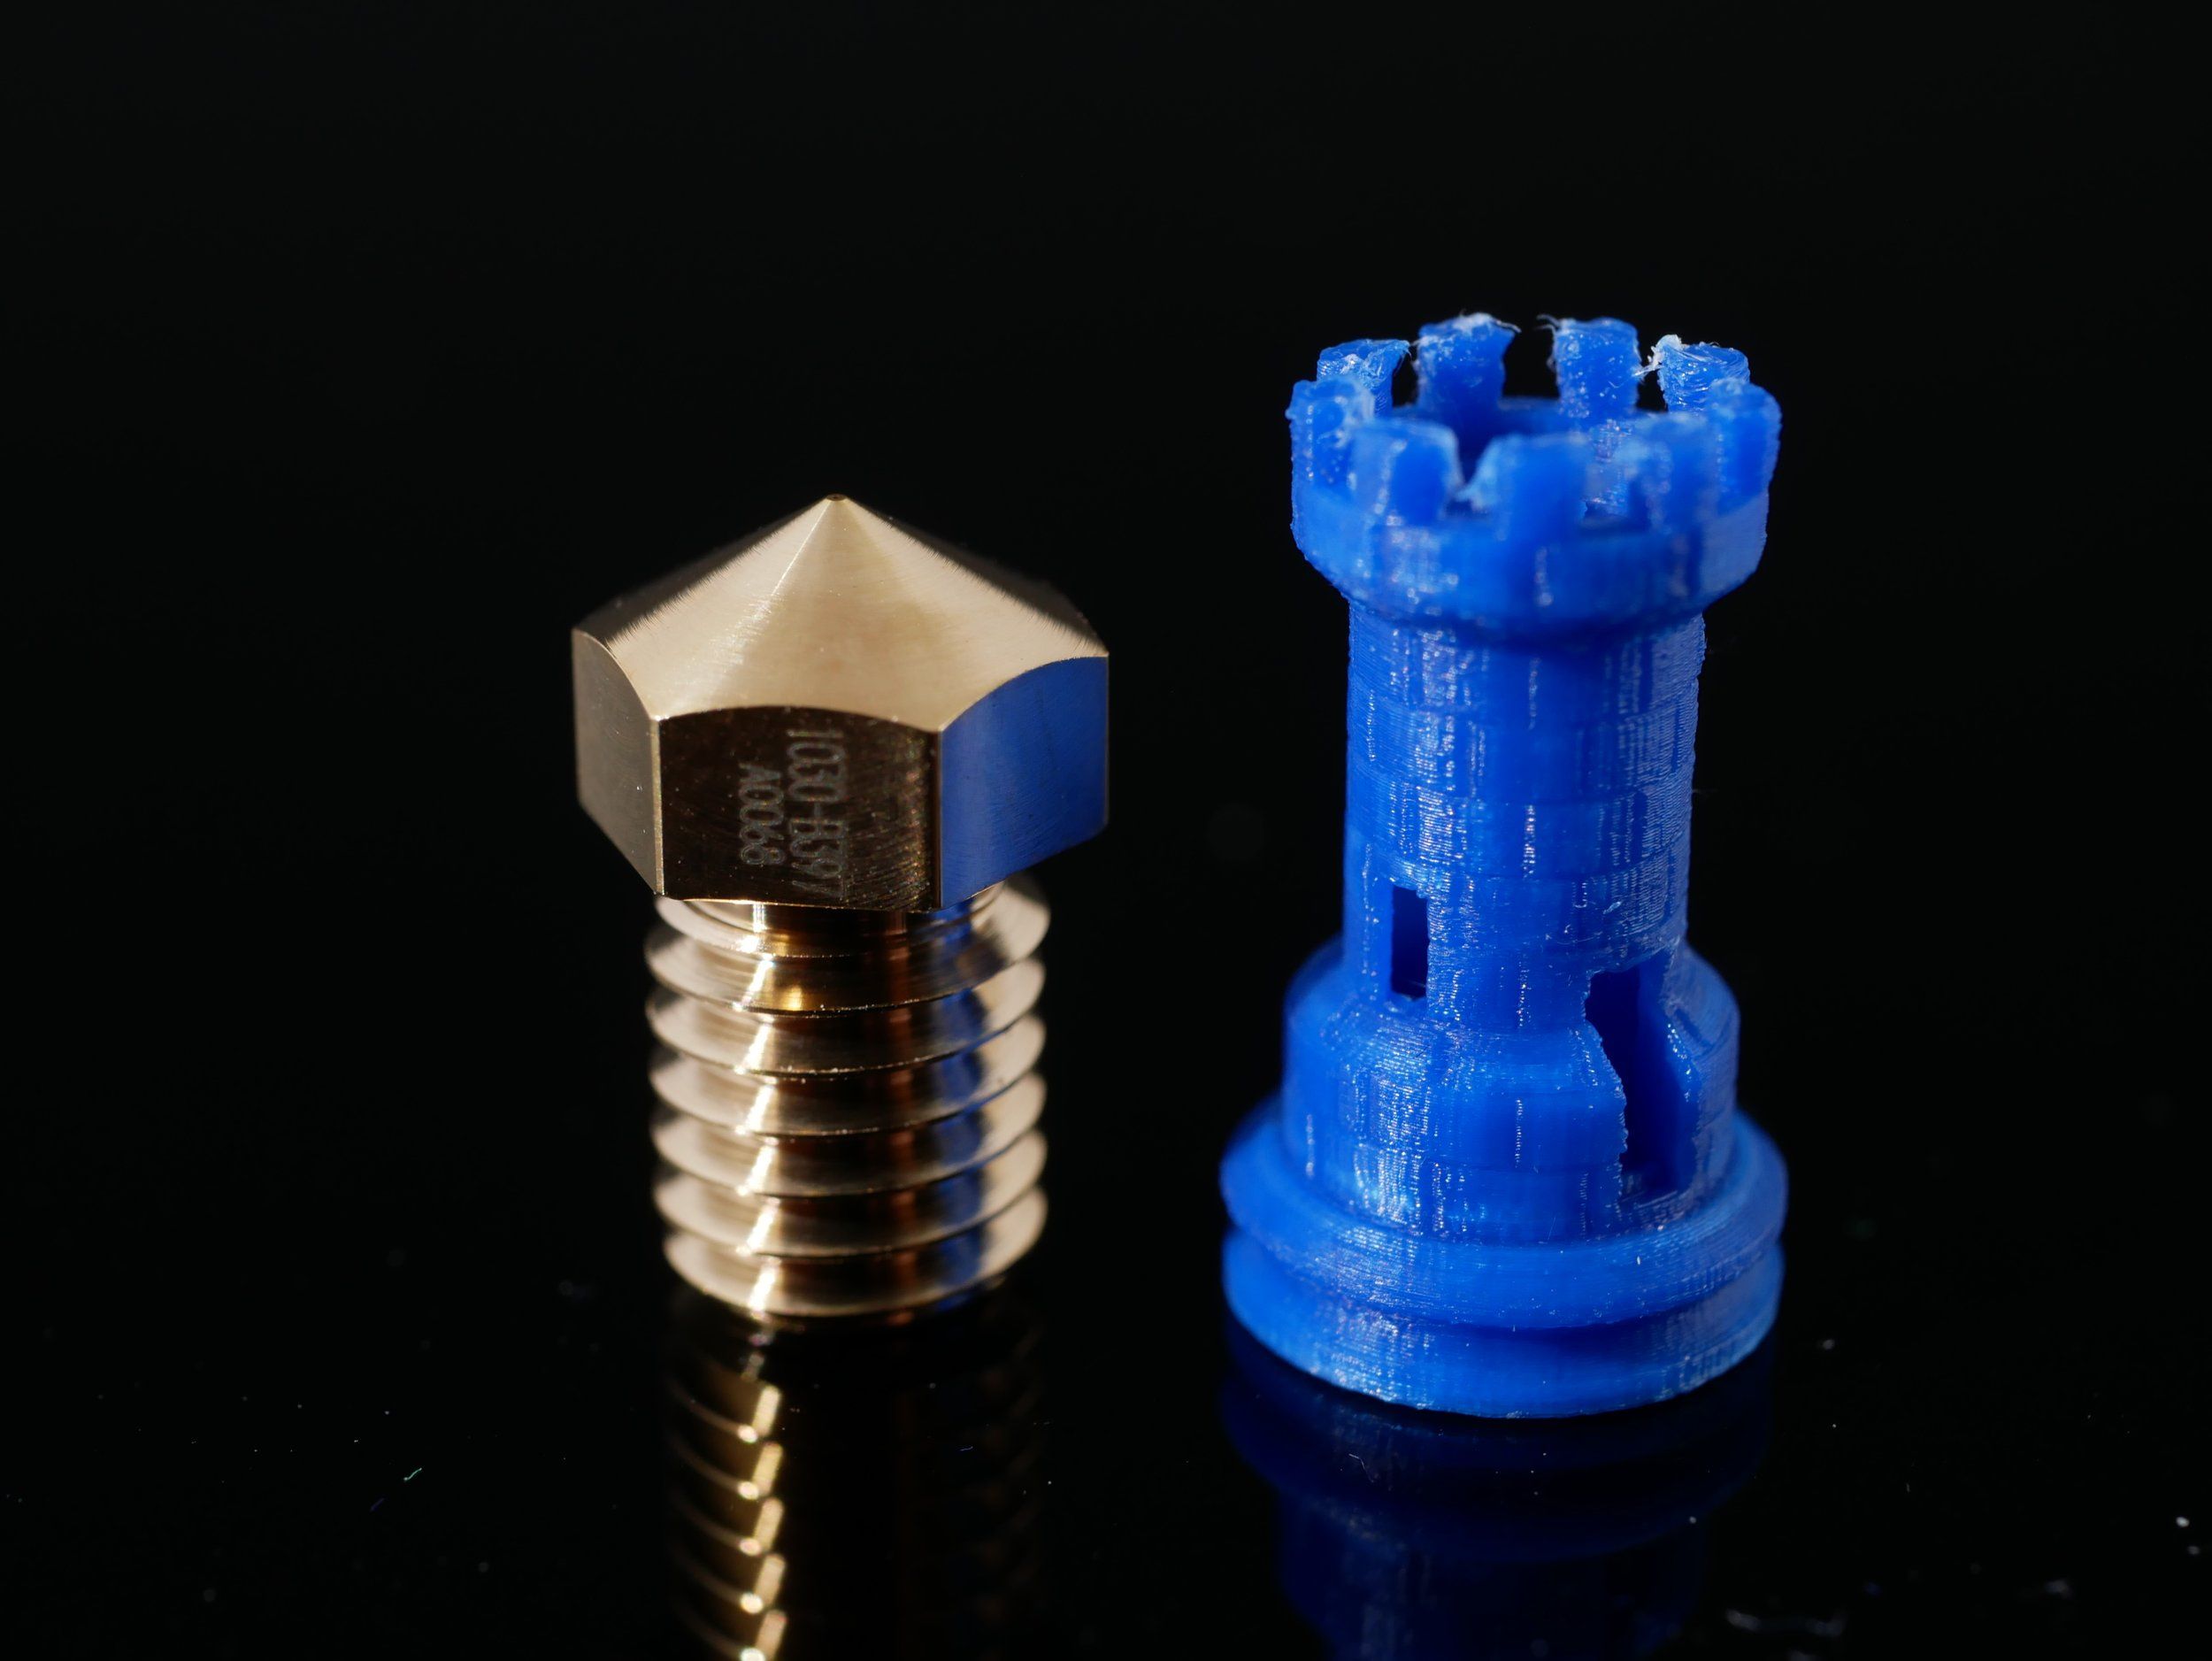 How To Determine Nozzle Size In 3D Printer